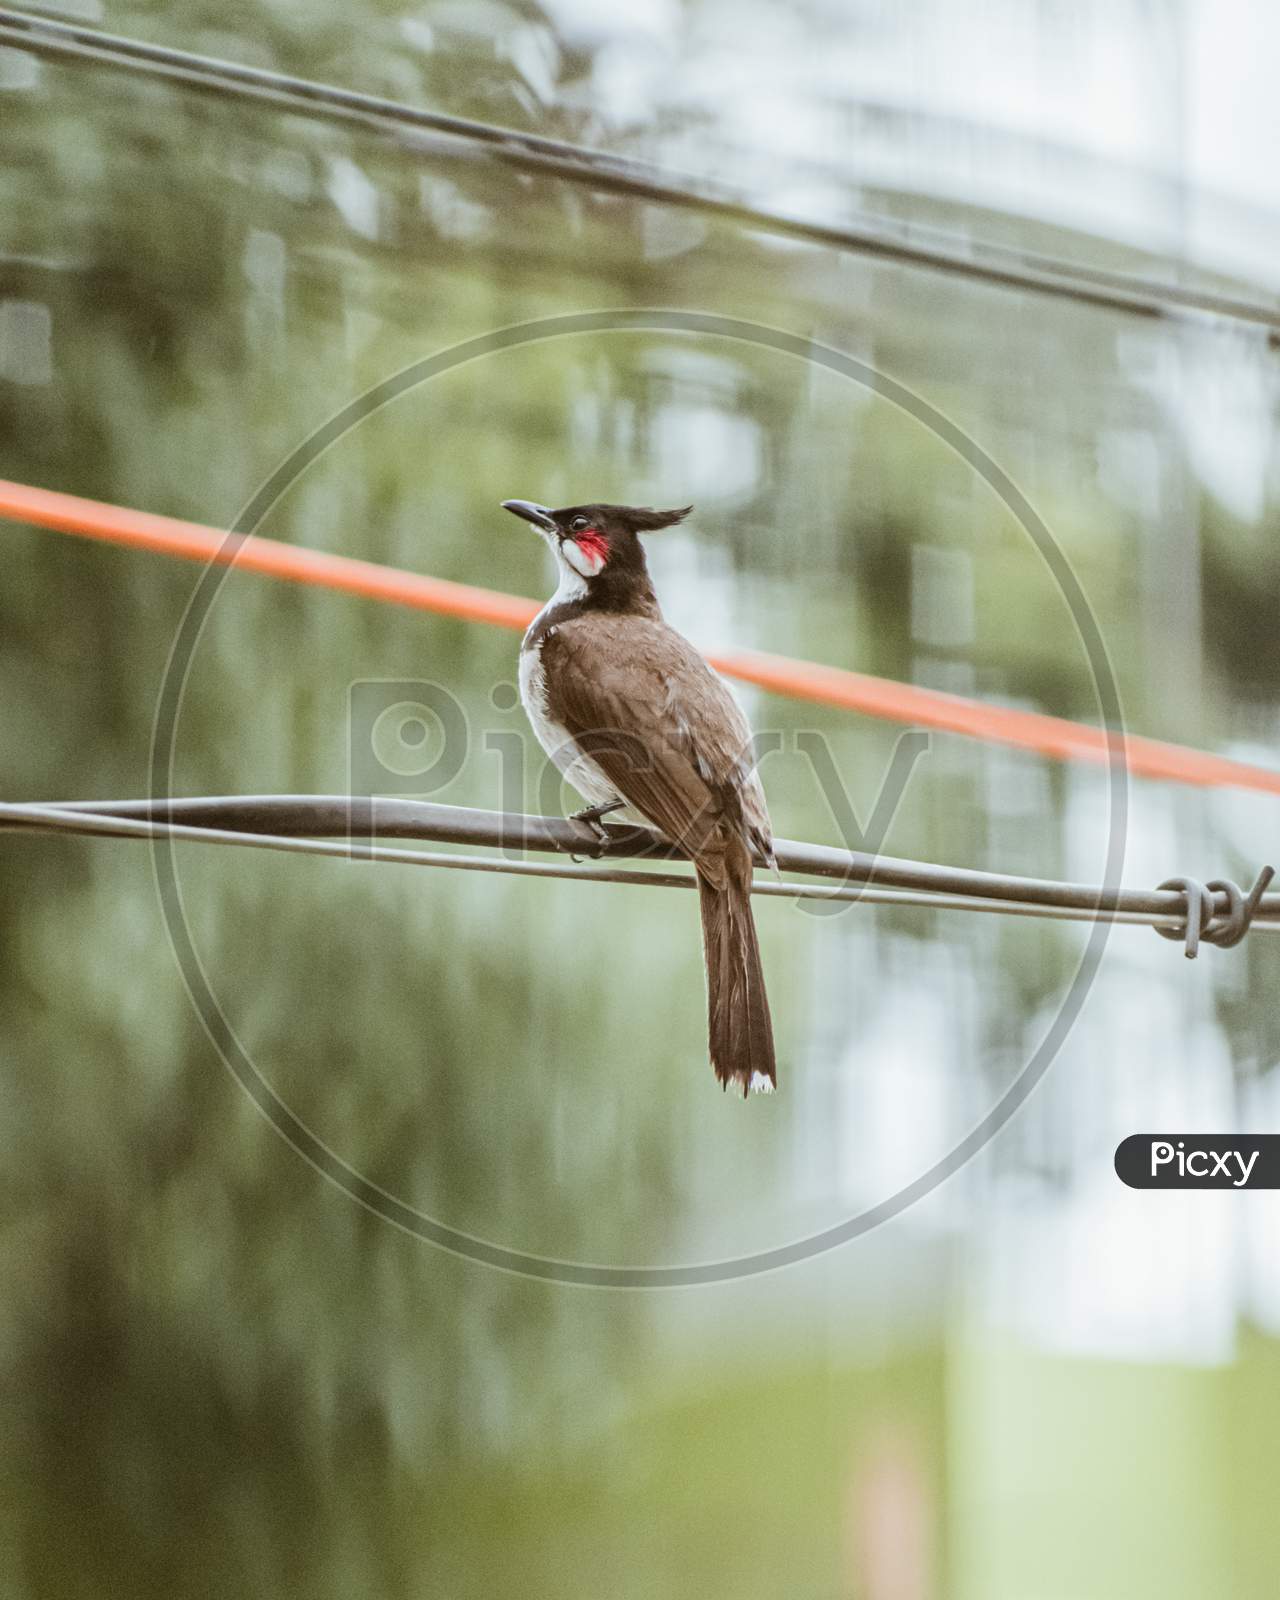 It's a Red-Whiskered Bulbul. Close up shot.